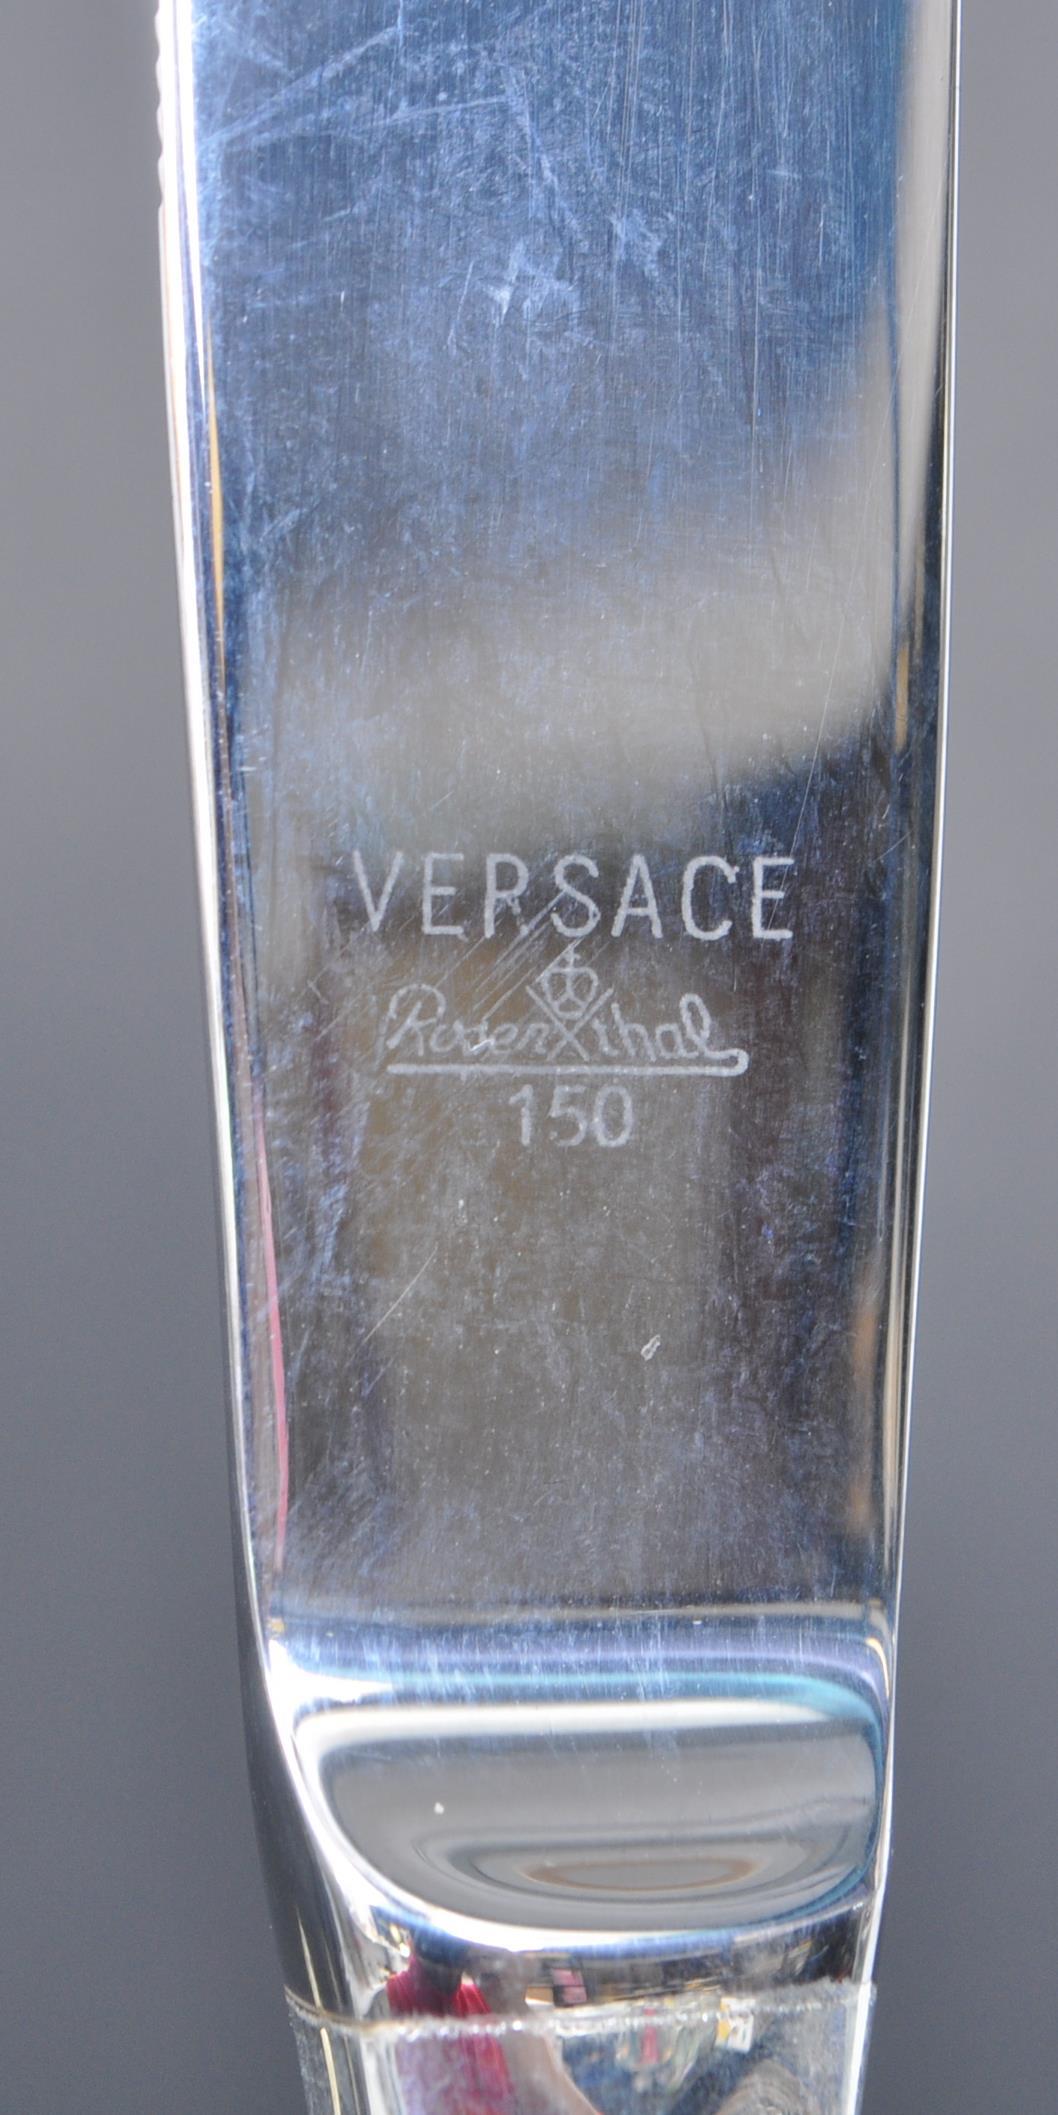 VERSACE ROSENTHAL CUTLERY CANTEEN - Image 6 of 9